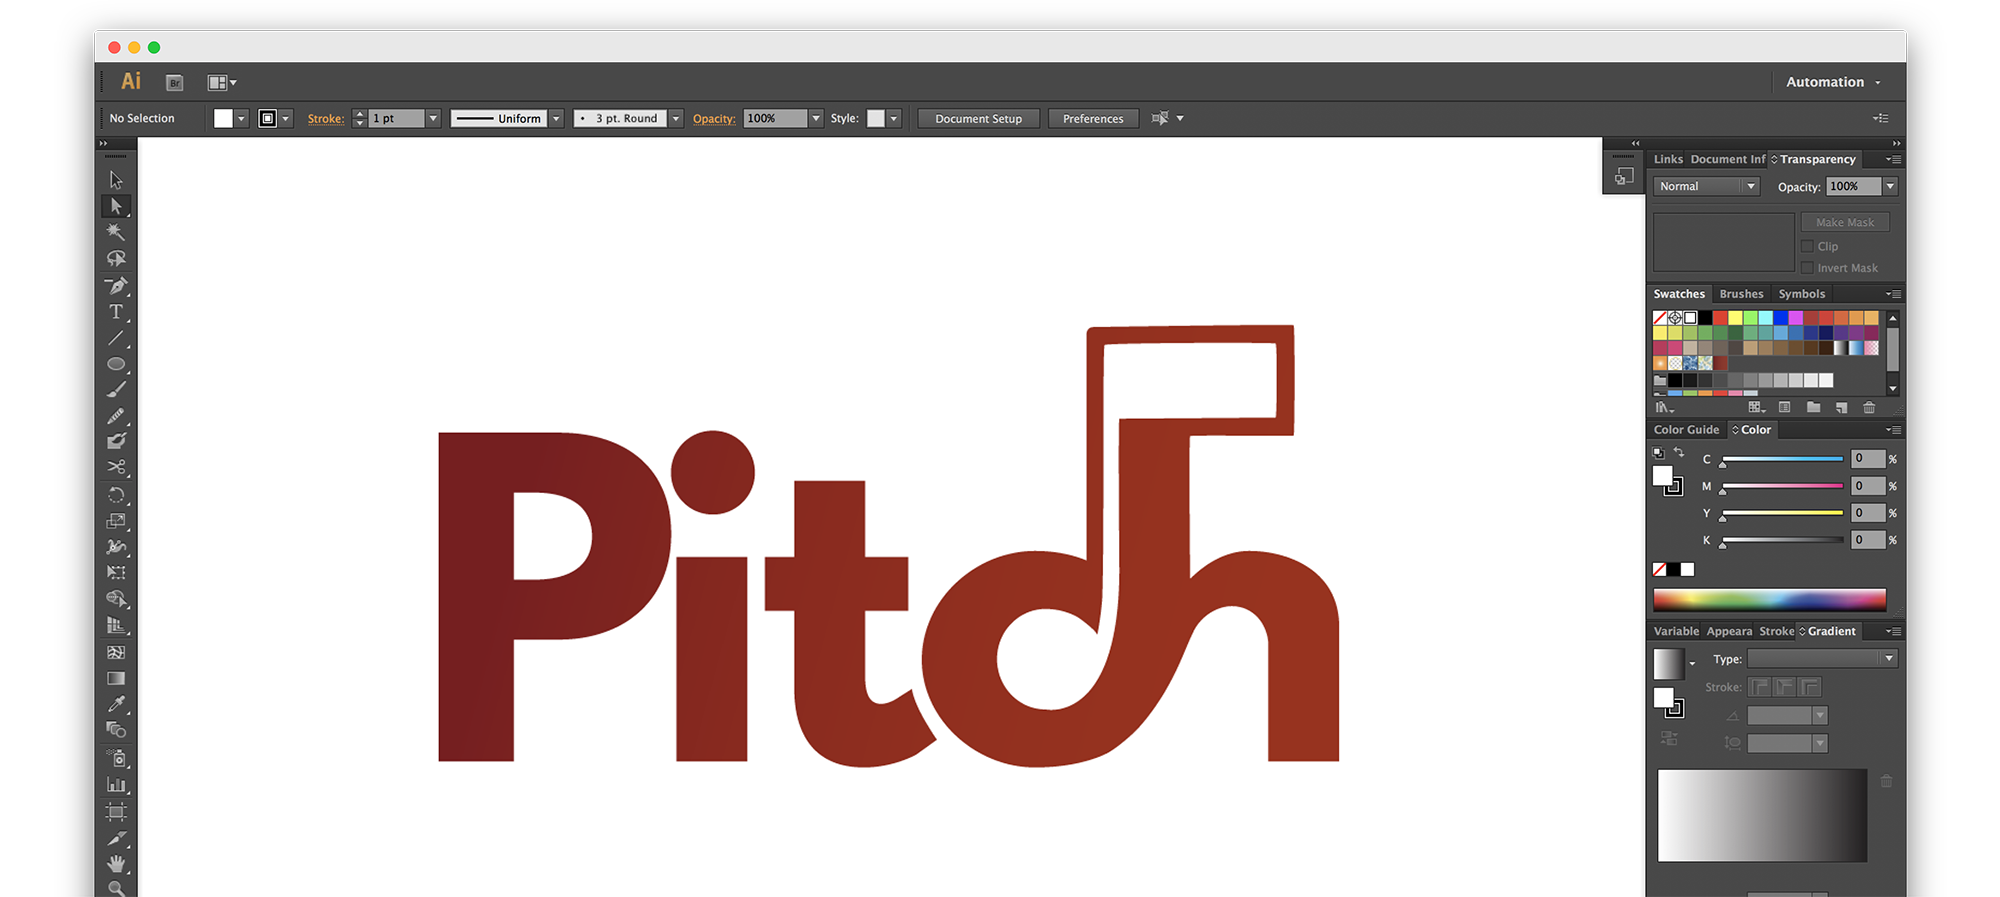 A screenshot of Adobe Illustrator with a logo for a music platform called Pitch.